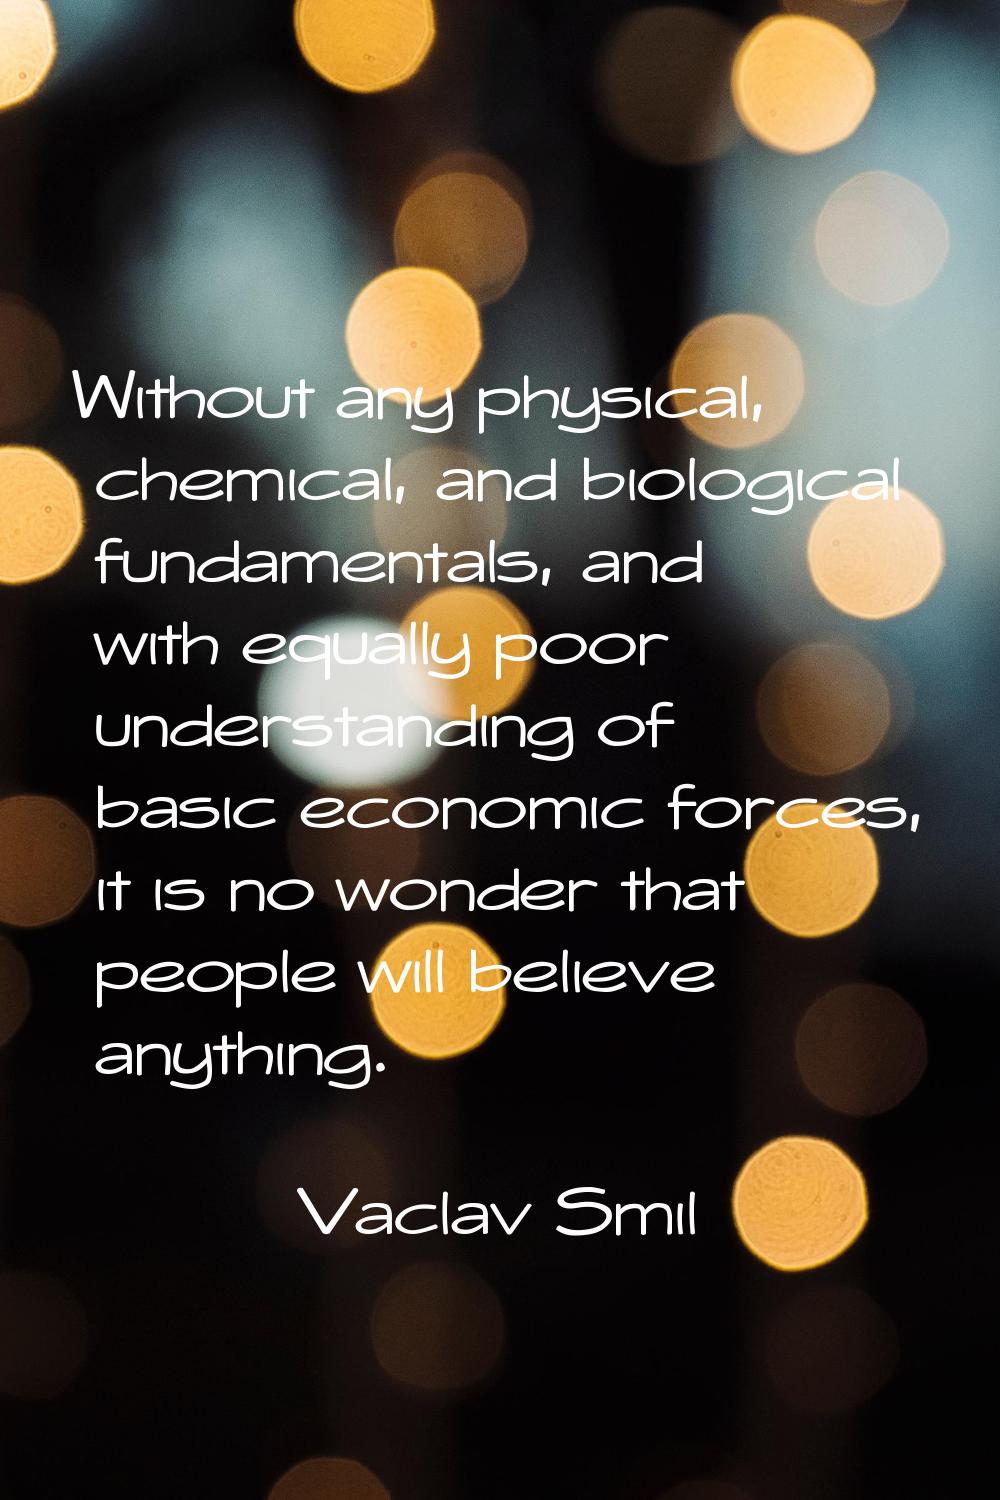 Without any physical, chemical, and biological fundamentals, and with equally poor understanding of